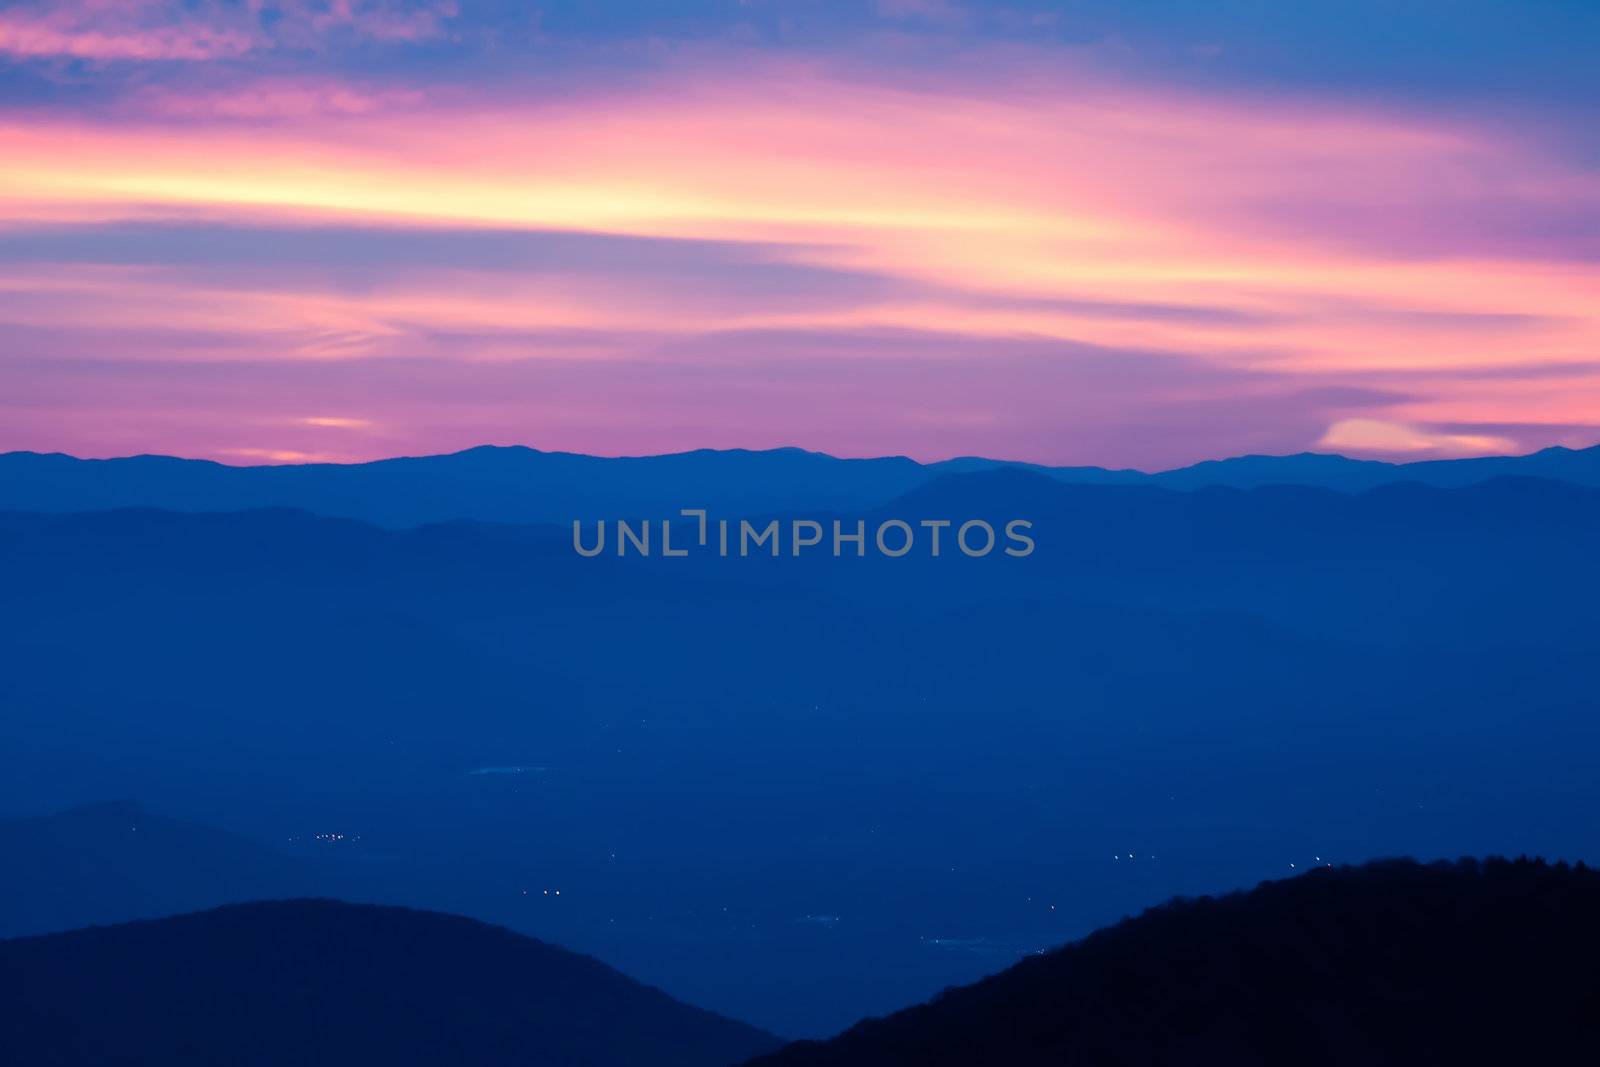 Blue Ridge Parkway Scenic Landscape Appalachian Mountains Ridges Sunset Layers over Great Smoky Mountains National Park by digidreamgrafix